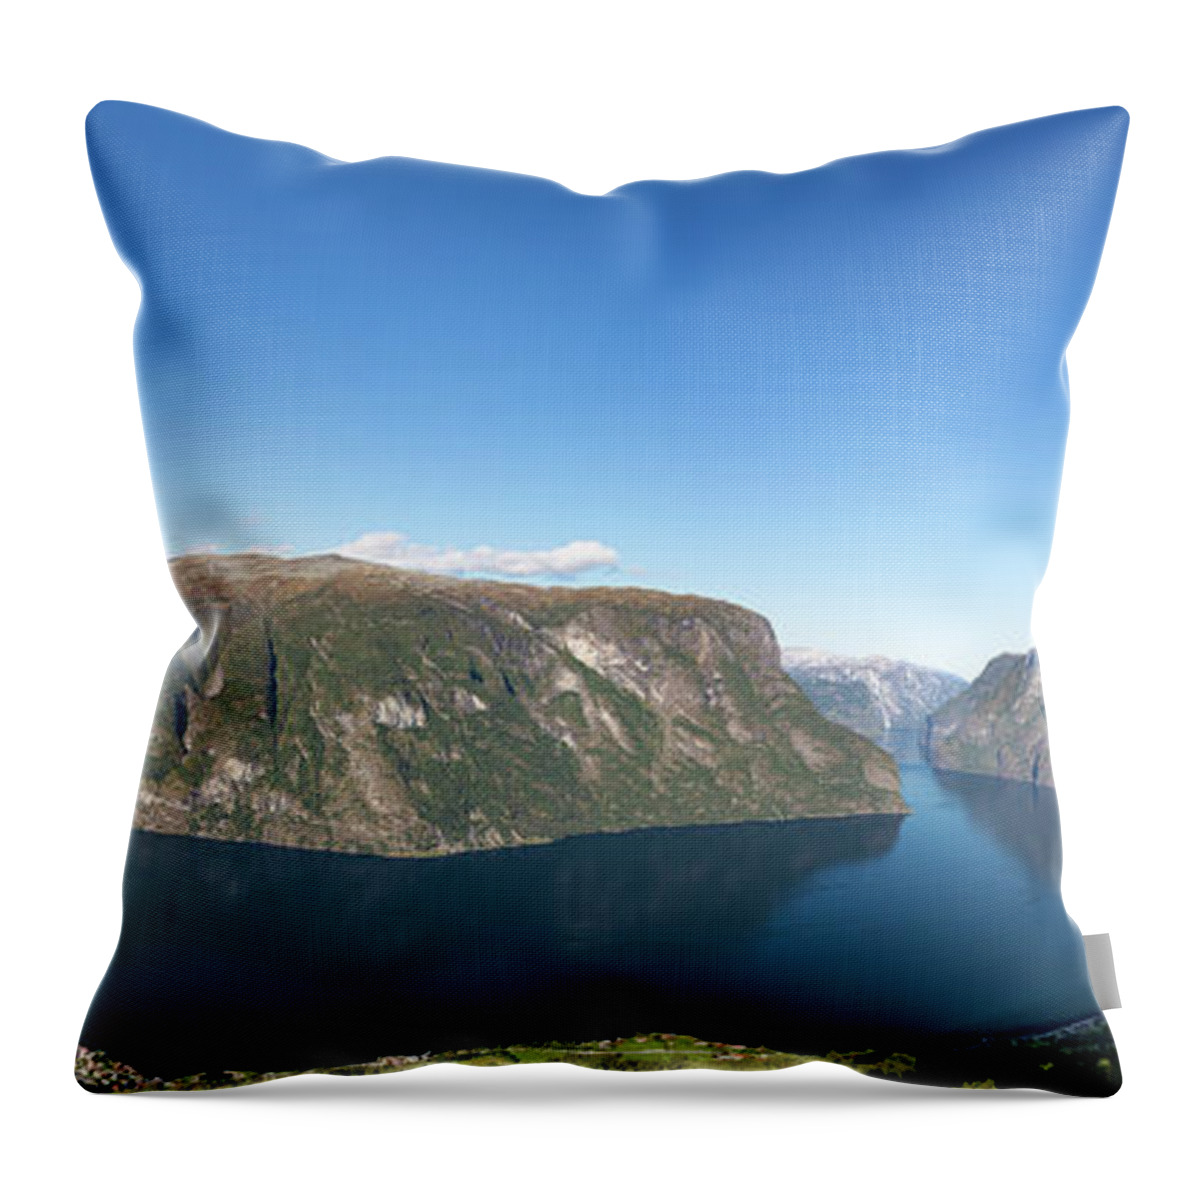 Outdoors Throw Pillow featuring the photograph Stegastein, Norway by Andreas Levi